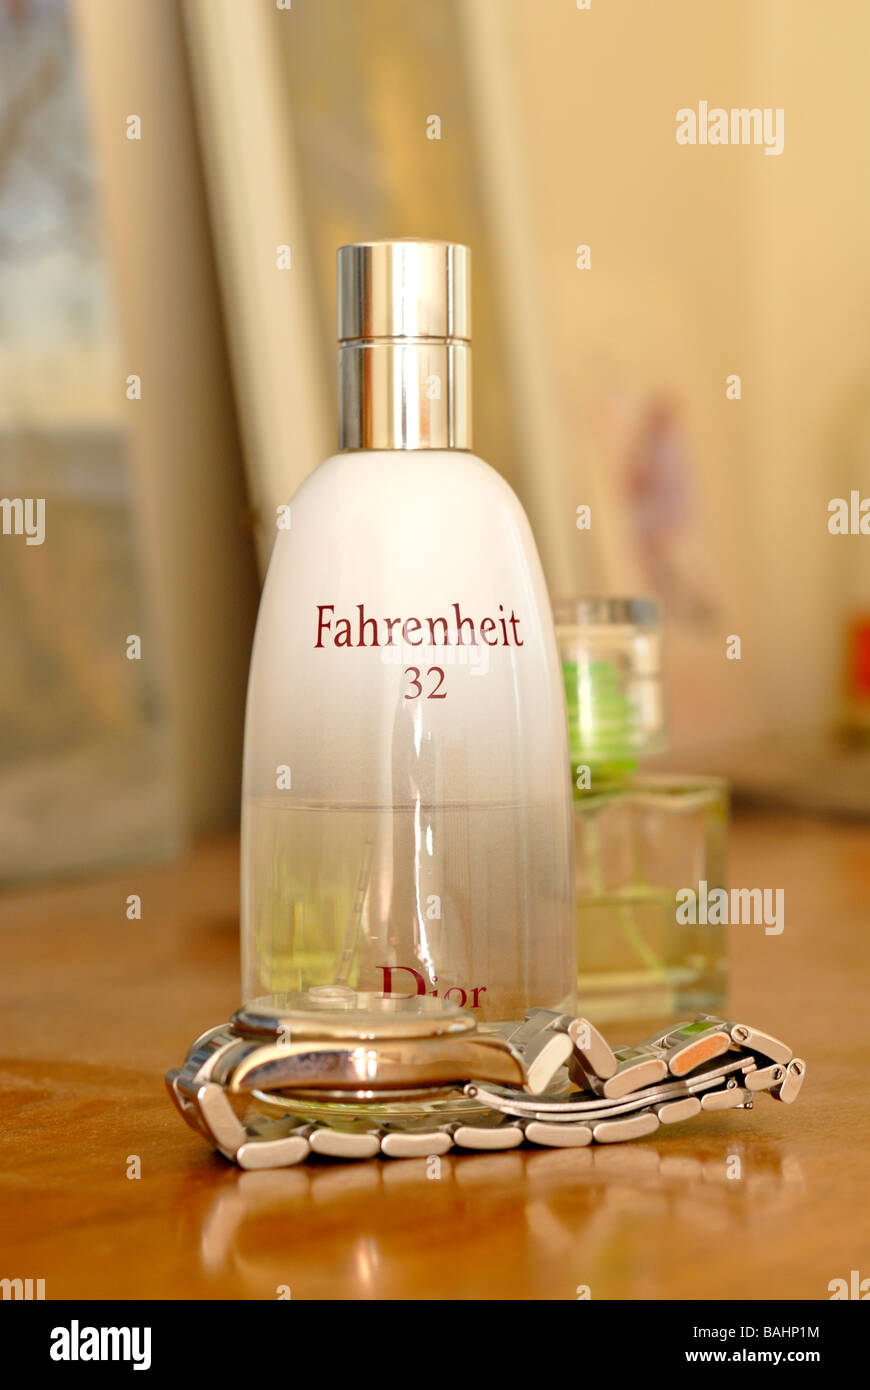 Fahrenheit 32 aftershave and watch Stock Photo